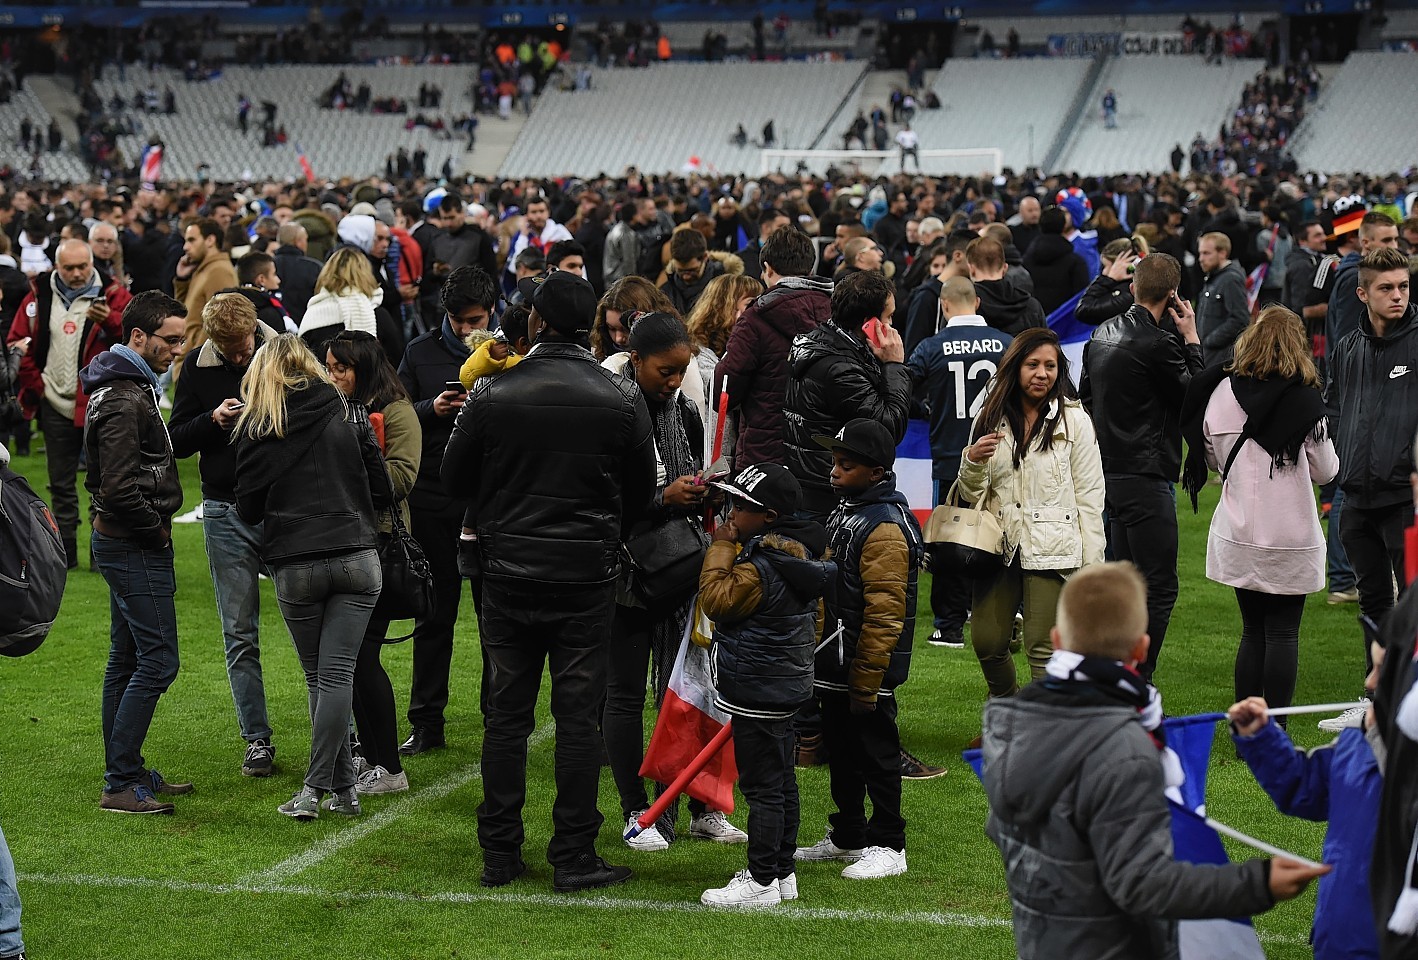 Spectators gather on the pitch of the Stade de France stadium following the International Friendly match between France and Germany at the Stade de France